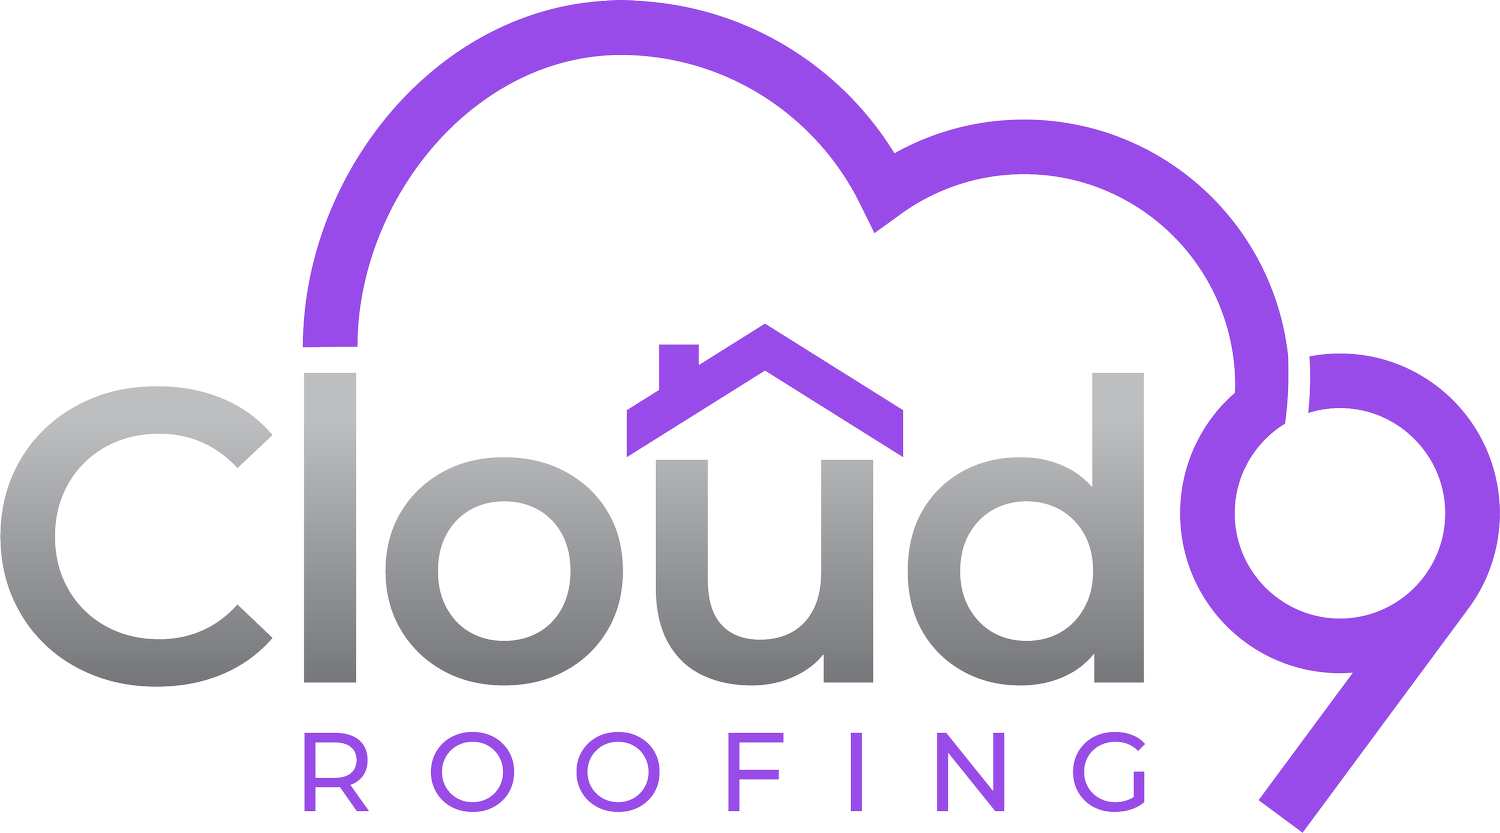 Coud9 Roofing